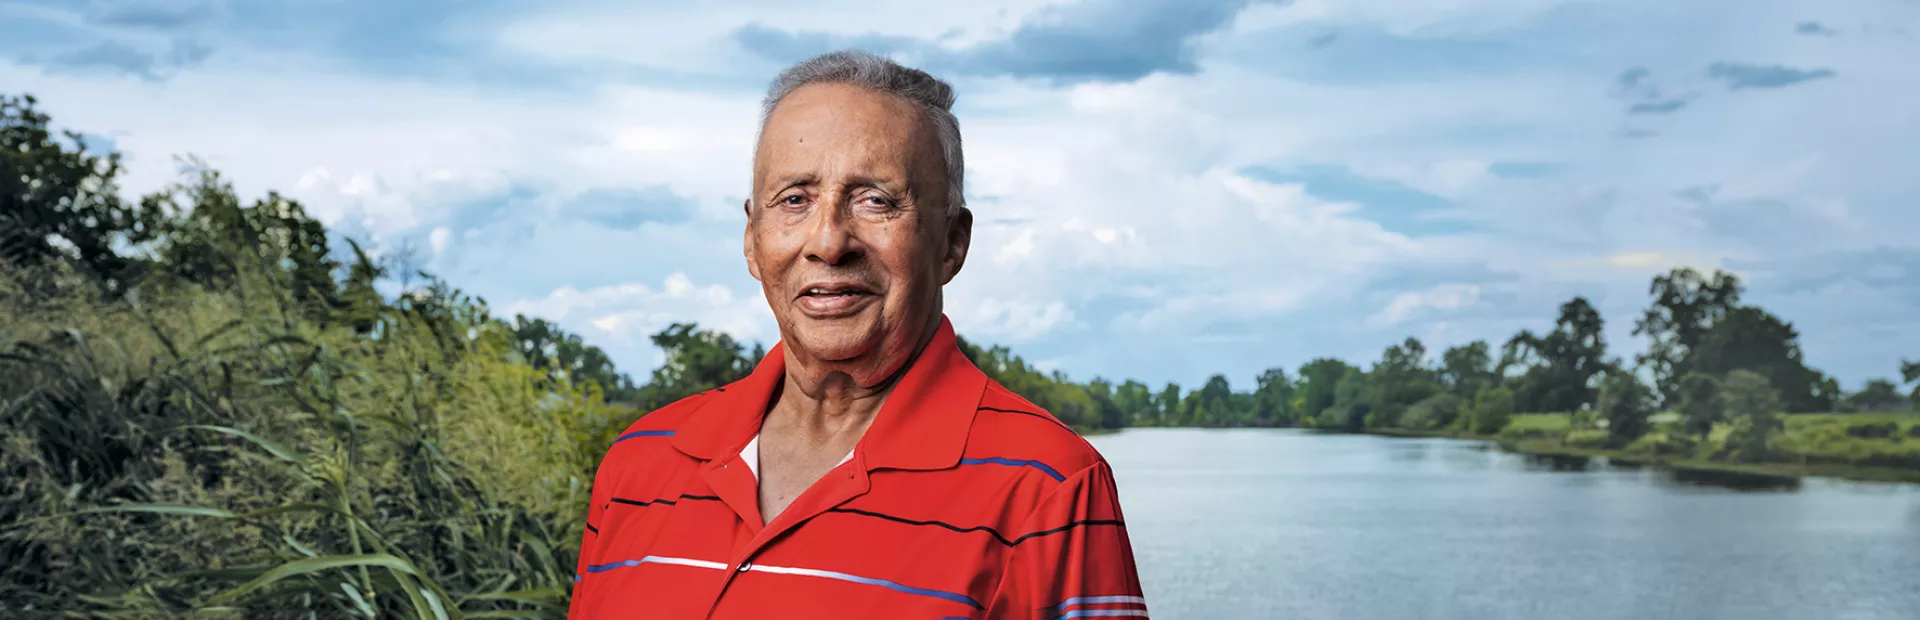 Van Lacour, prostate cancer patient living in Natchez, Louisiana, who received a Novartis radioligand therapy